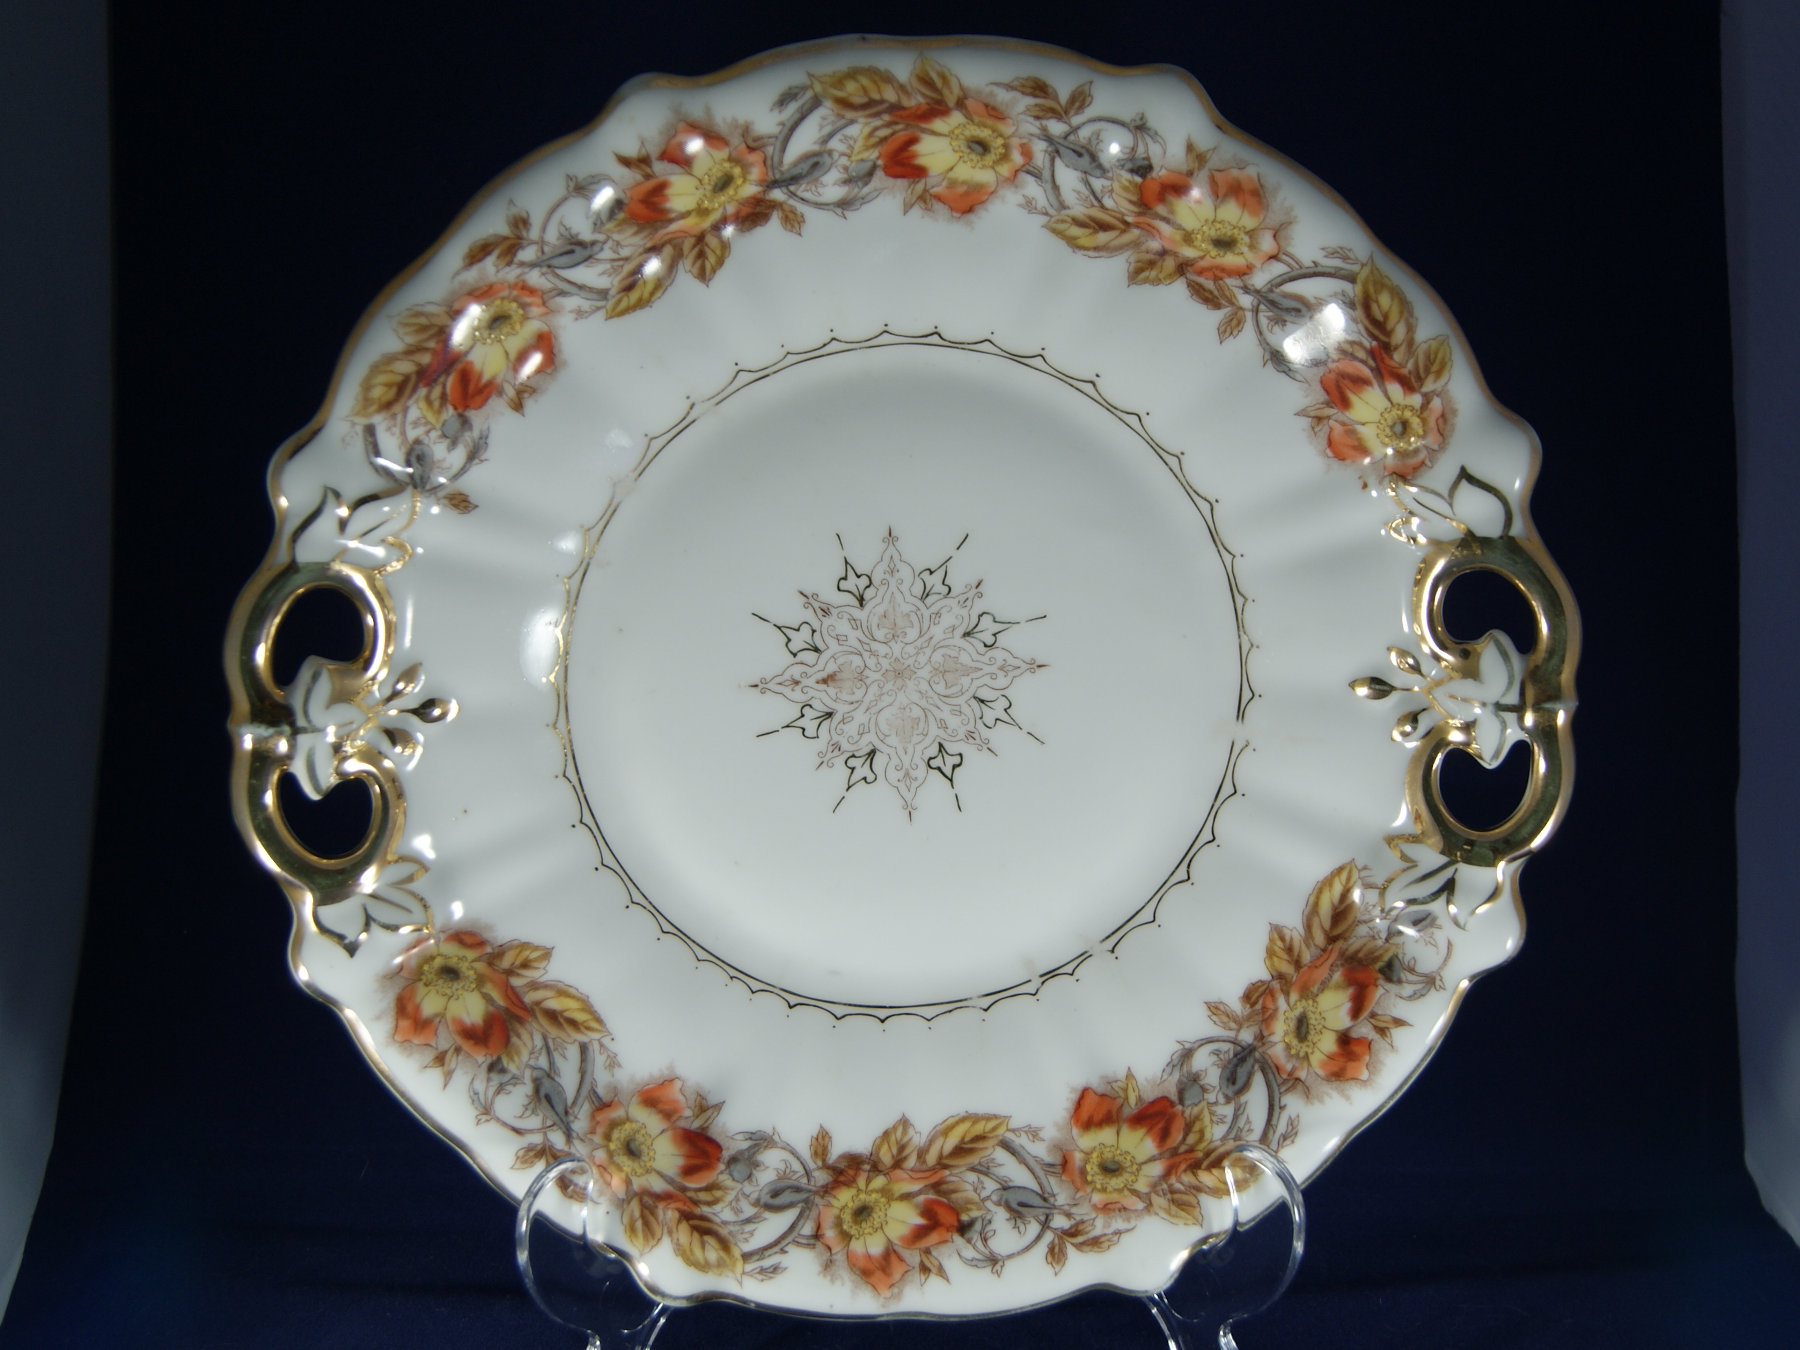 Waldenburg – Altwasser dish with fellow and red flowers leaves and golden decor